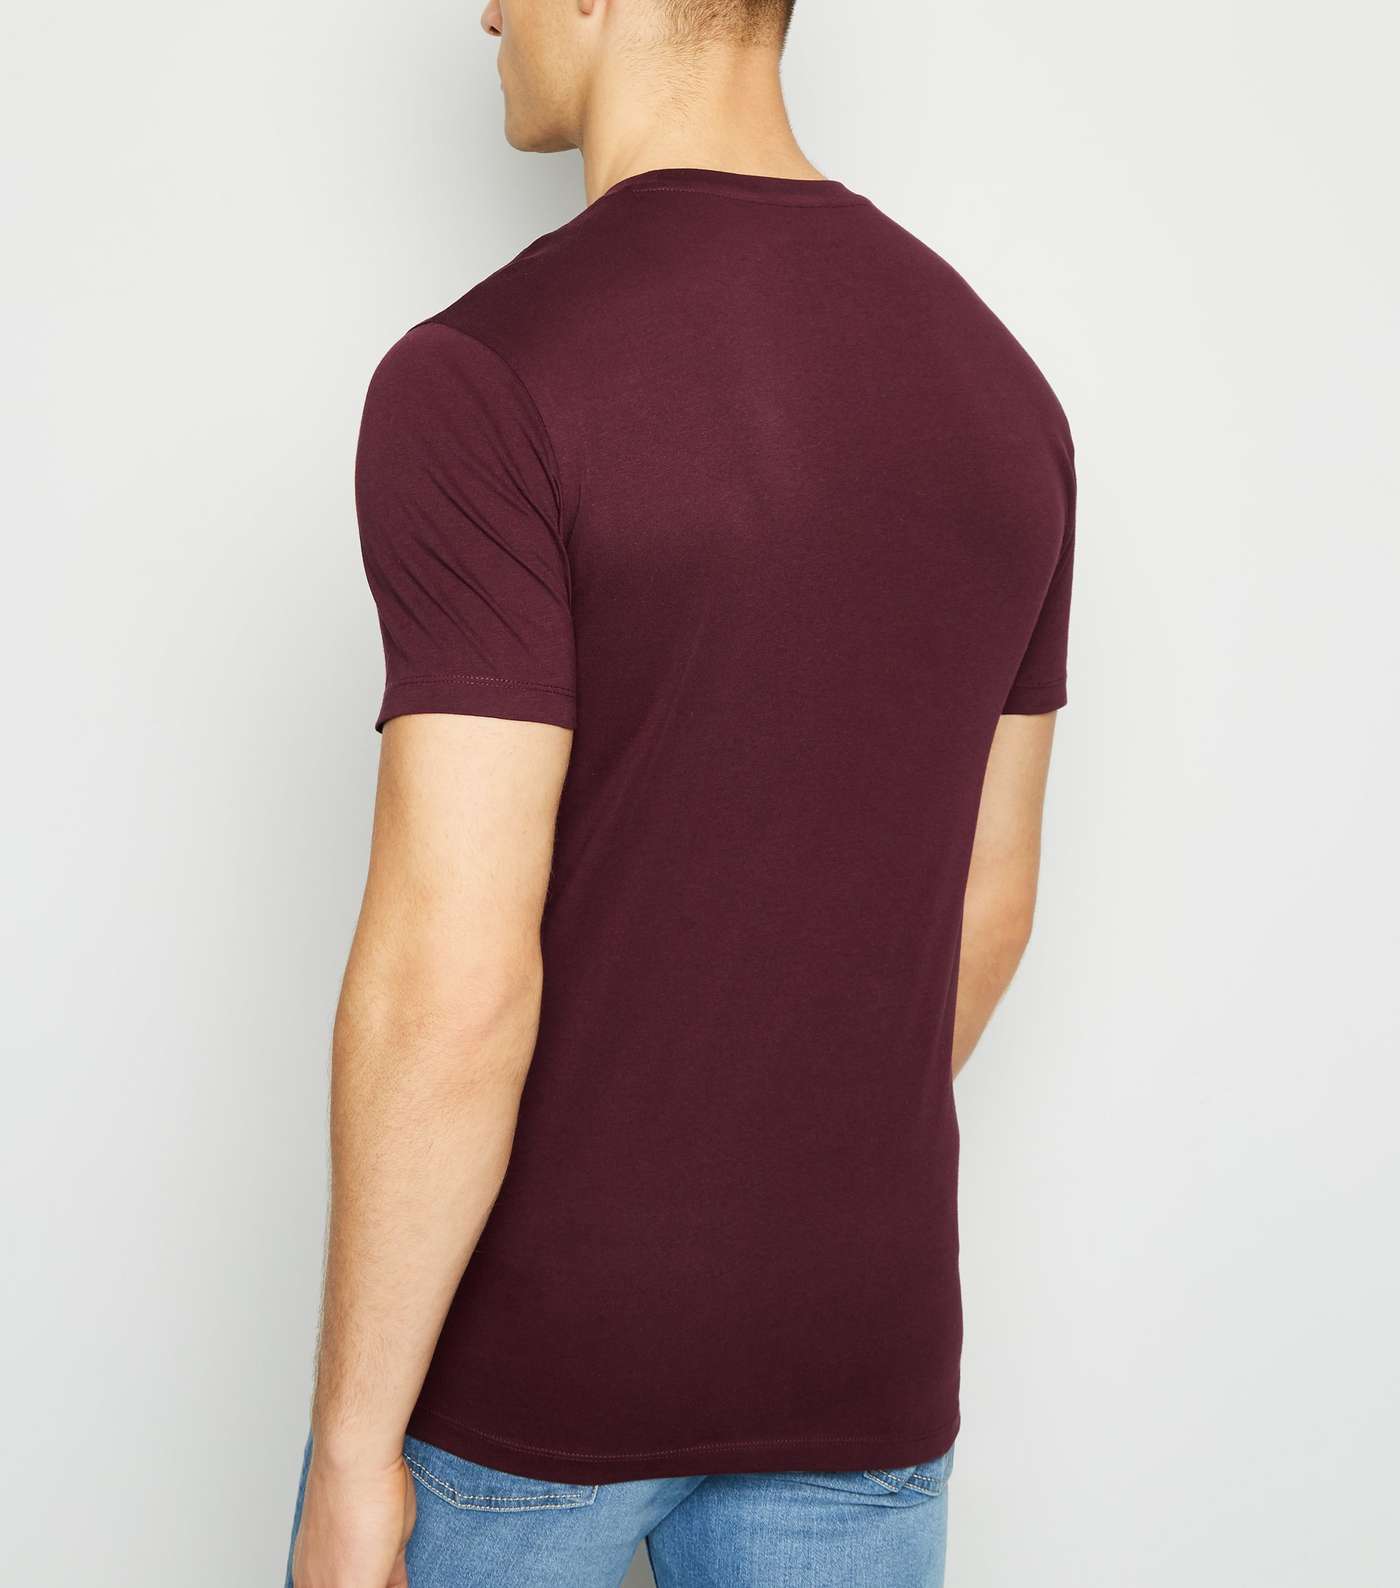 Burgundy Crew Neck Muscle Fit T-Shirt Image 3